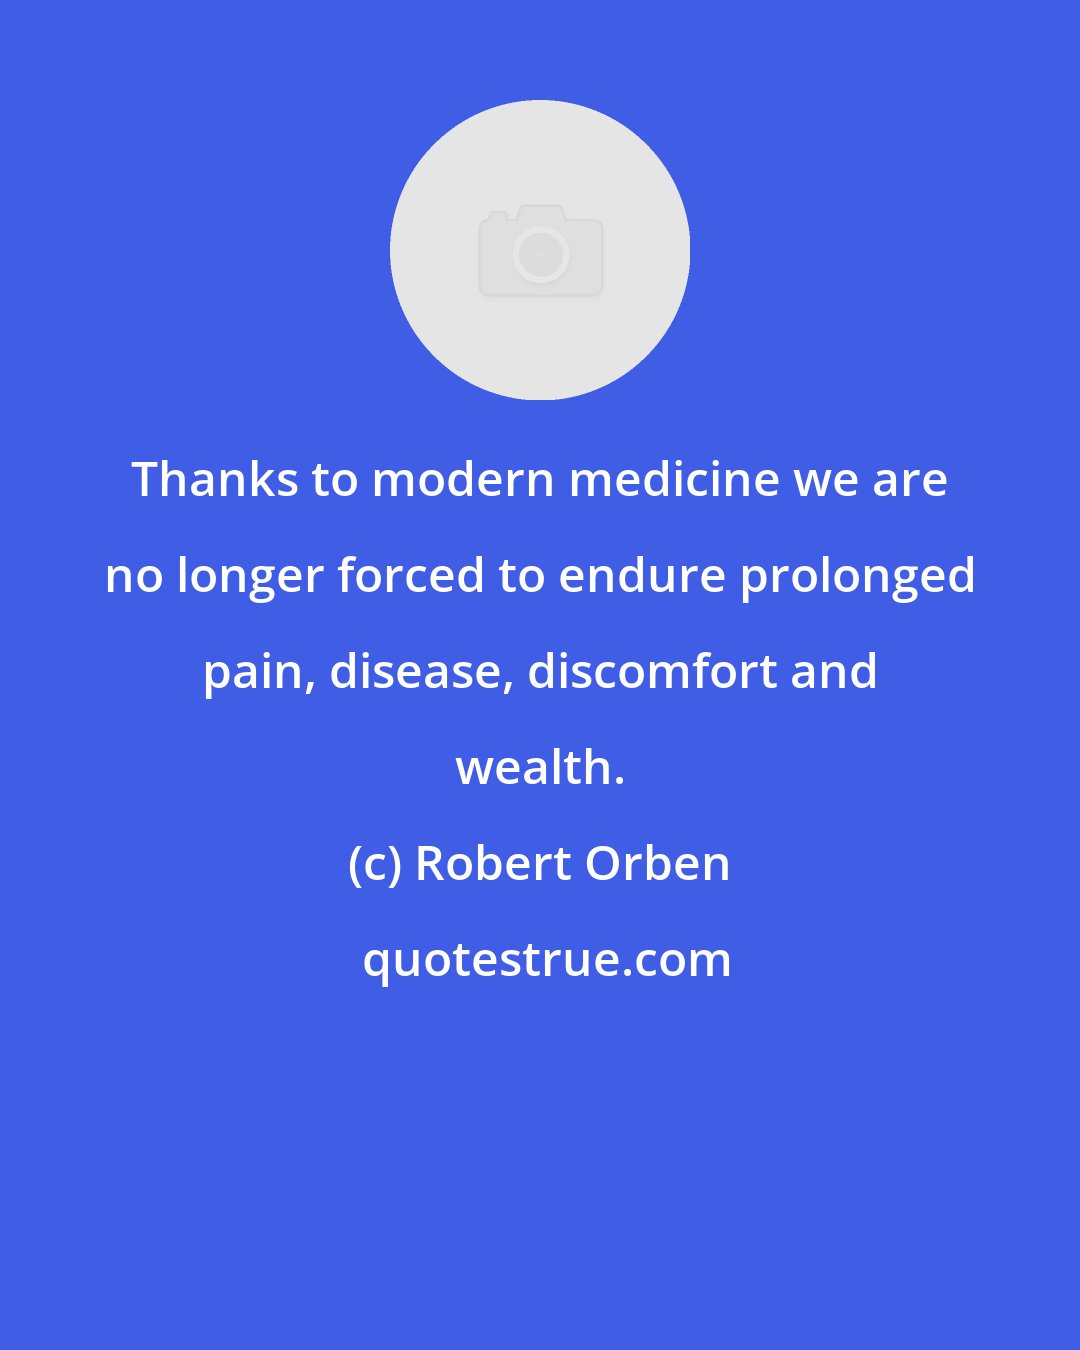 Robert Orben: Thanks to modern medicine we are no longer forced to endure prolonged pain, disease, discomfort and wealth.